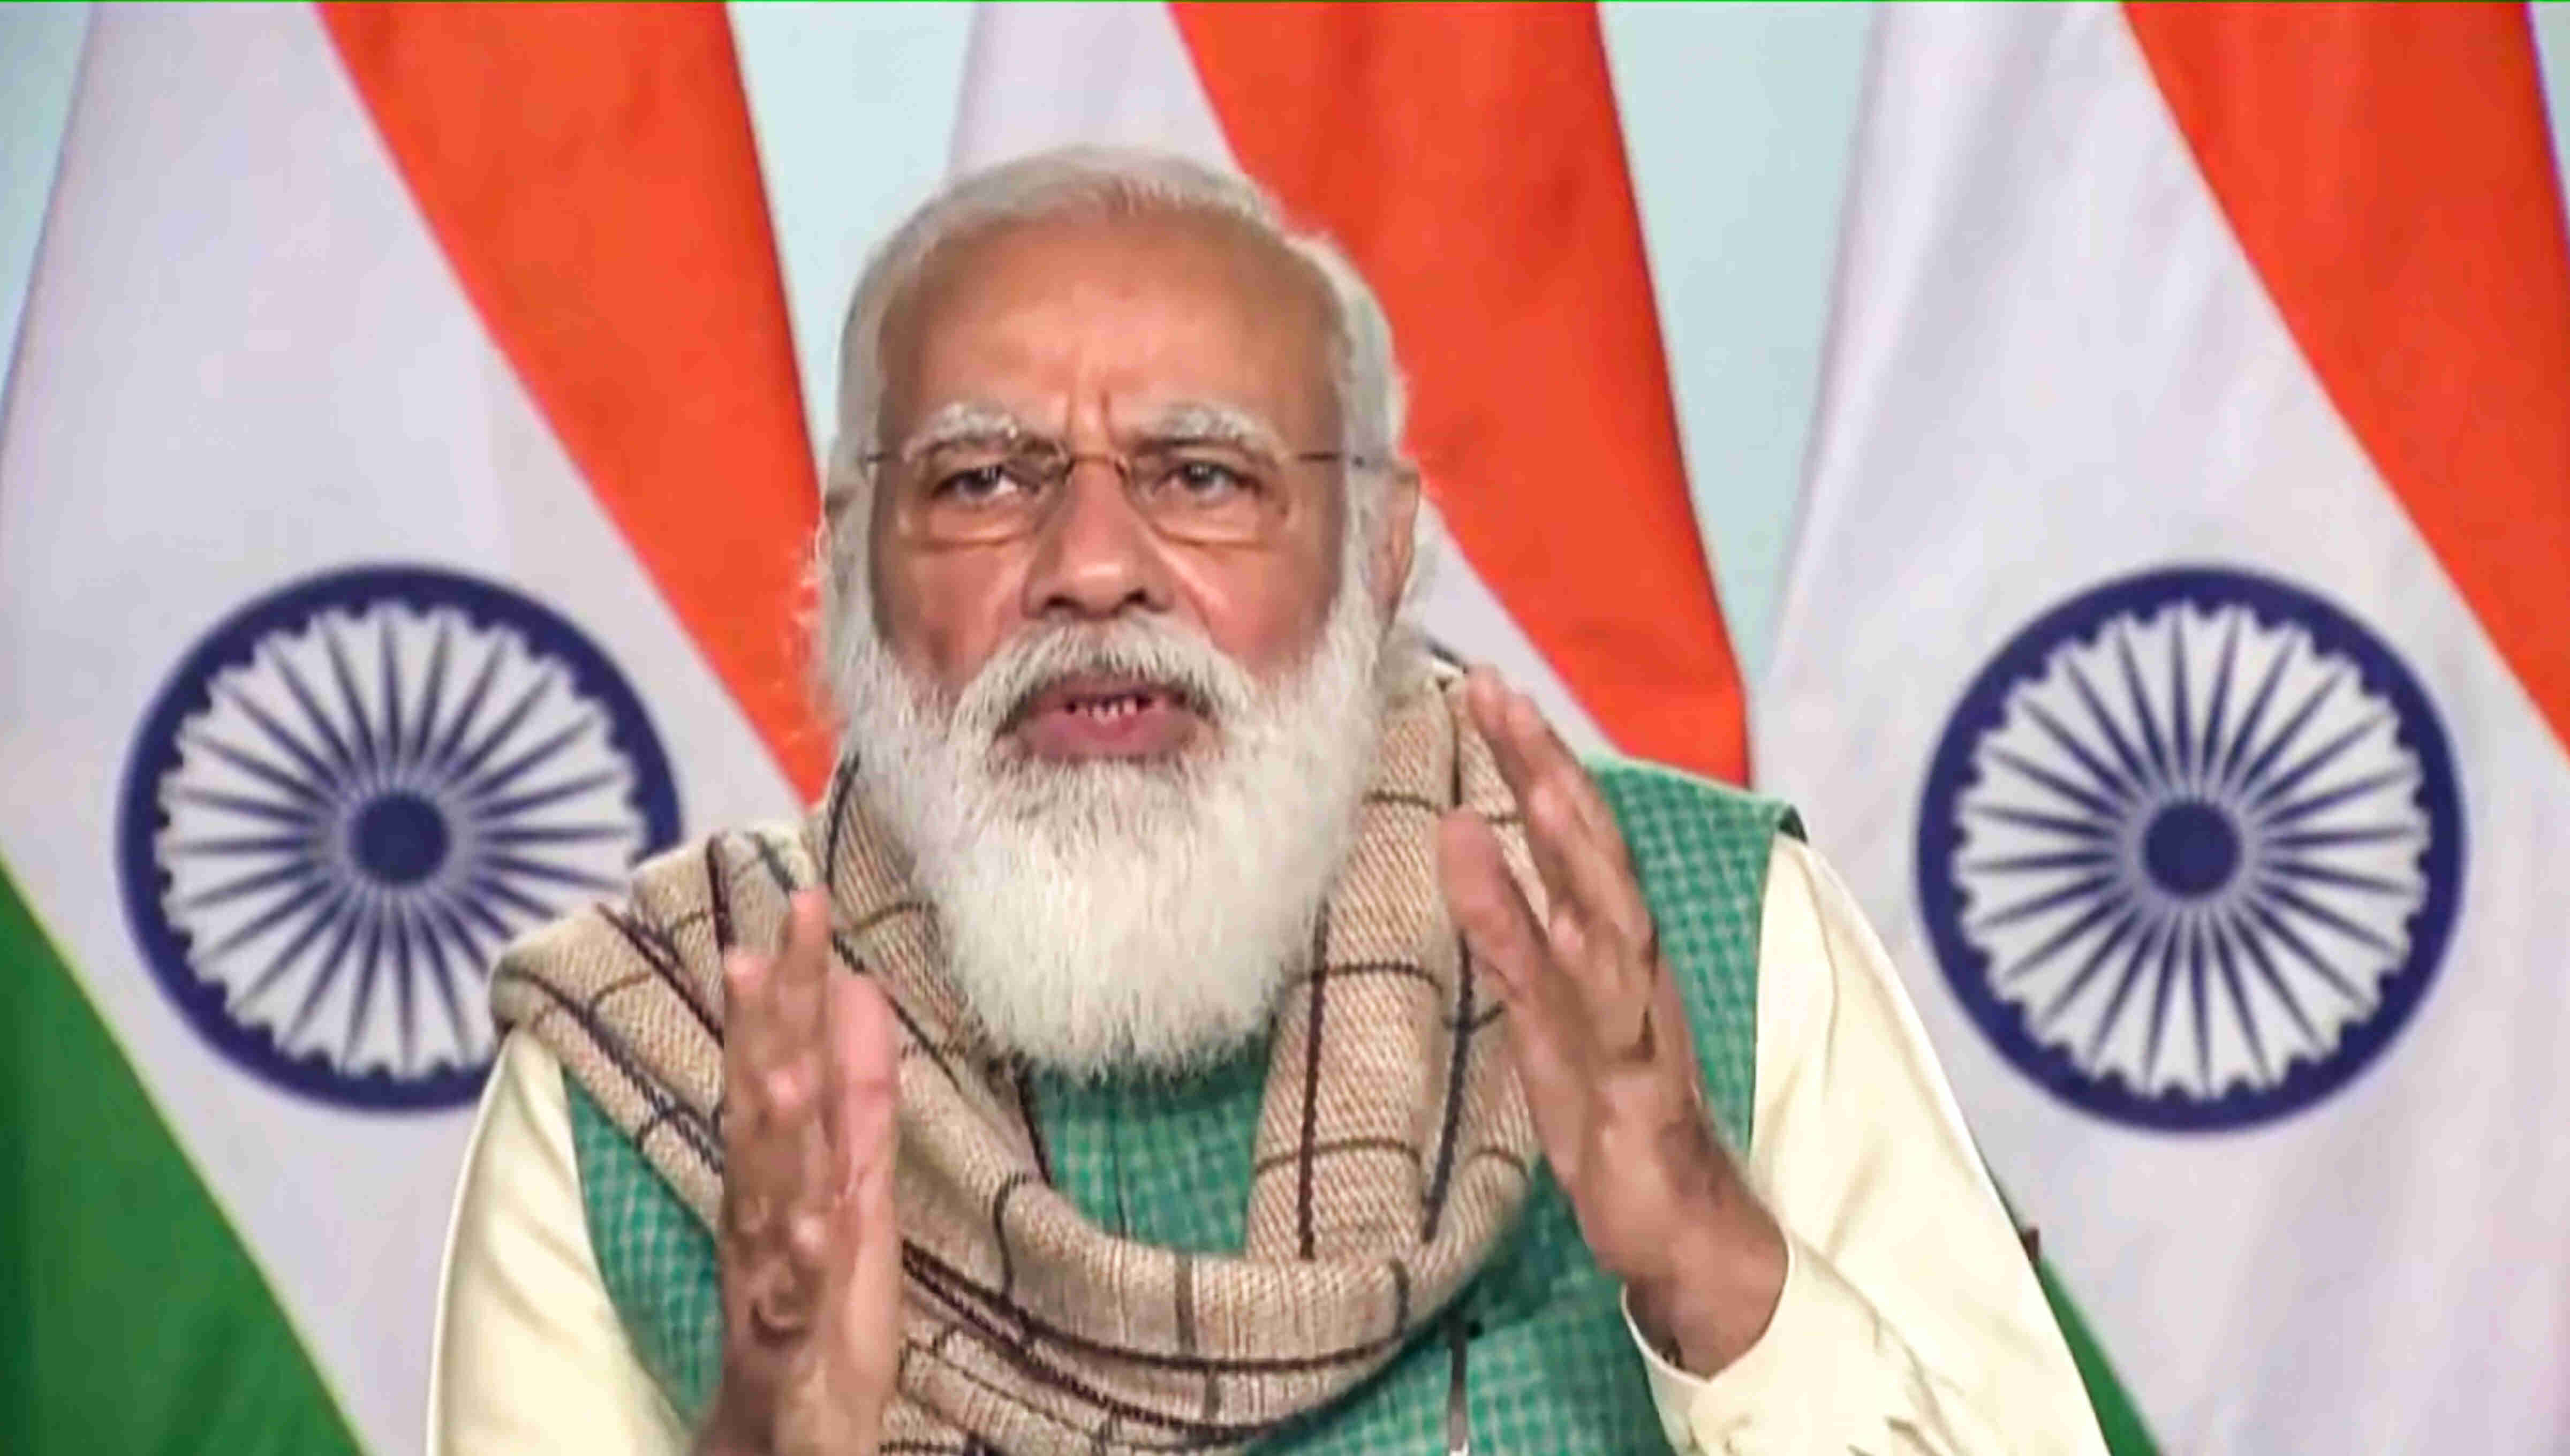 Expecting 7.5 pc economic growth rate this year: PM Modi